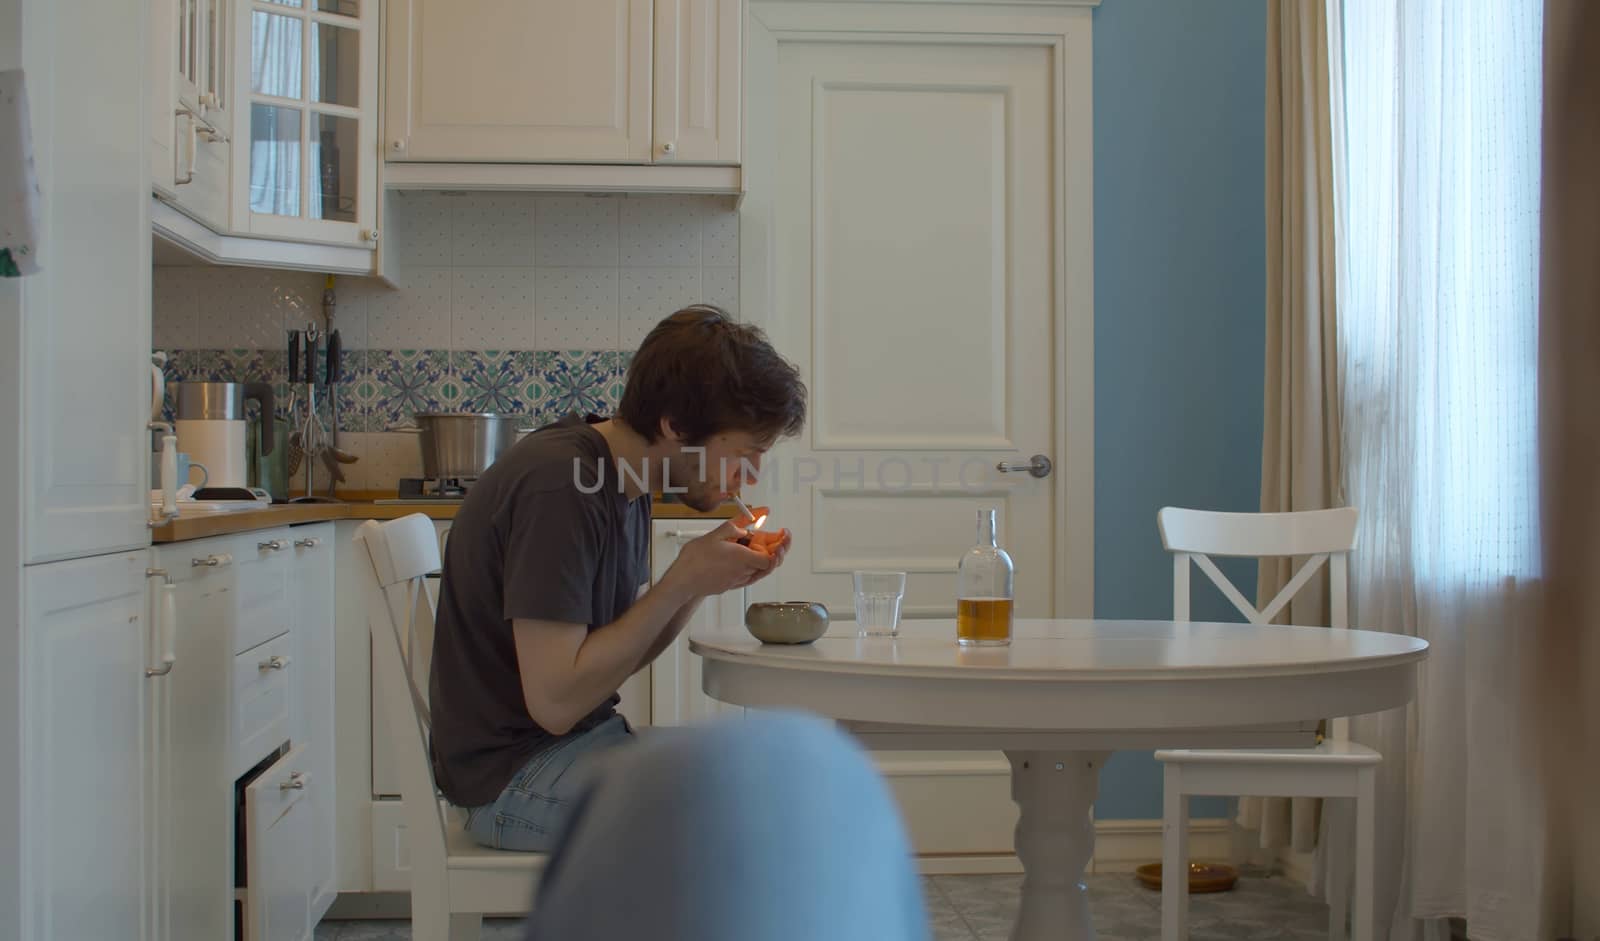 A drunk man lights a cigarette. Man drinking alcohol at home in the kitchen